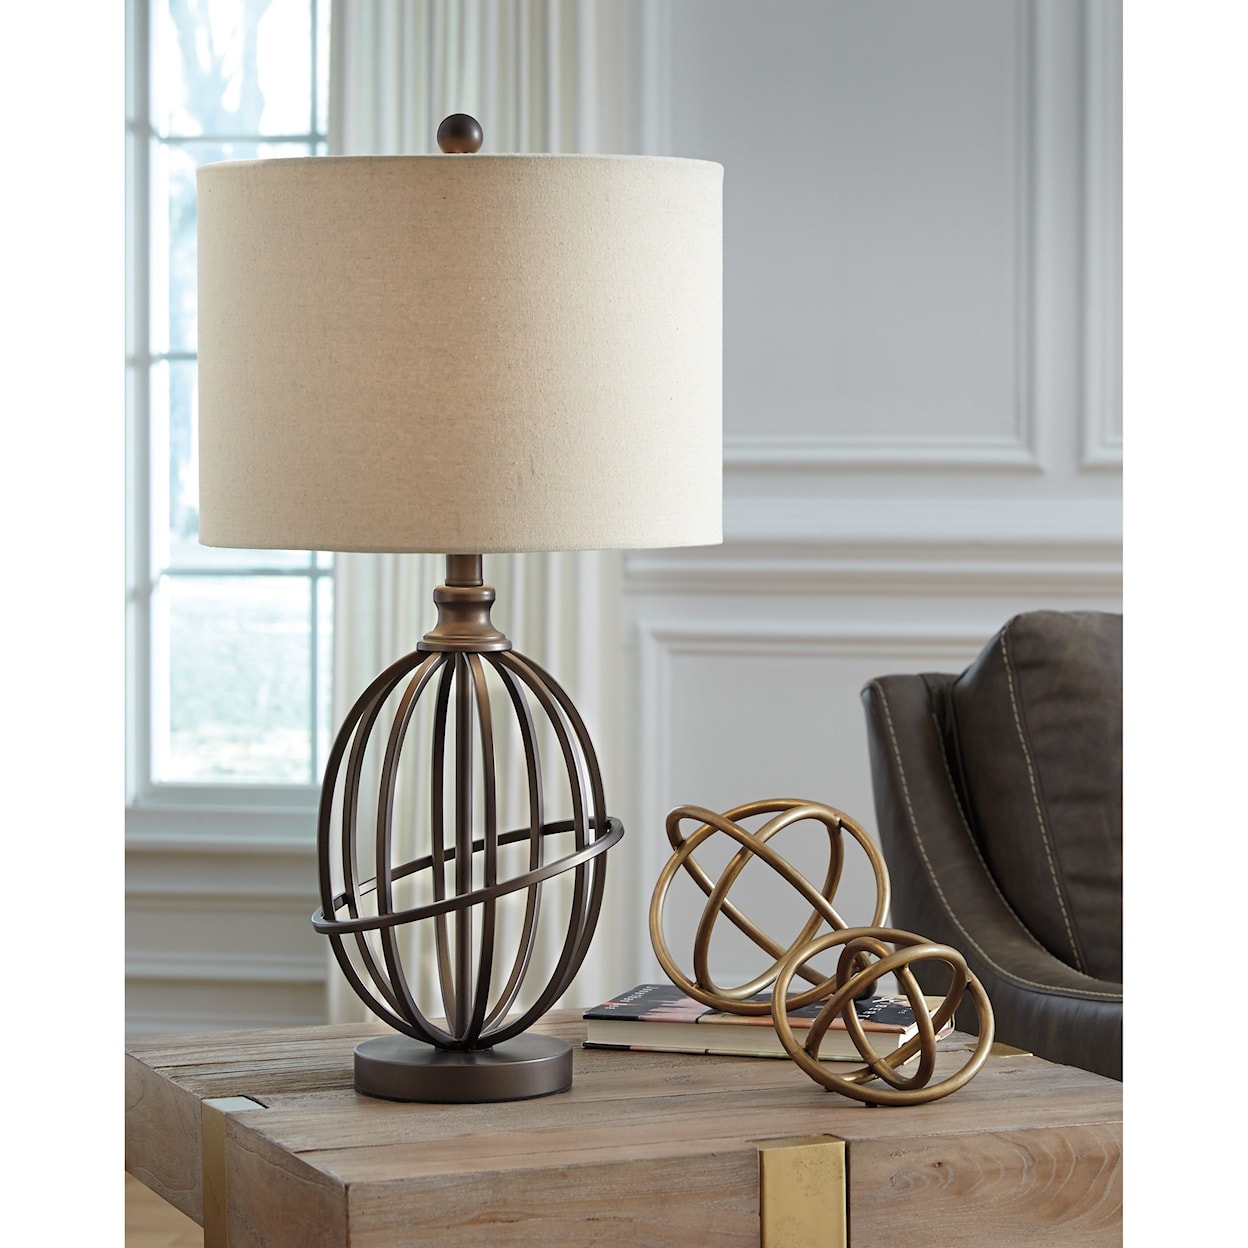 Signature Design by Ashley Lamps - Vintage Style Manase Bronze Finish Metal Table Lamp